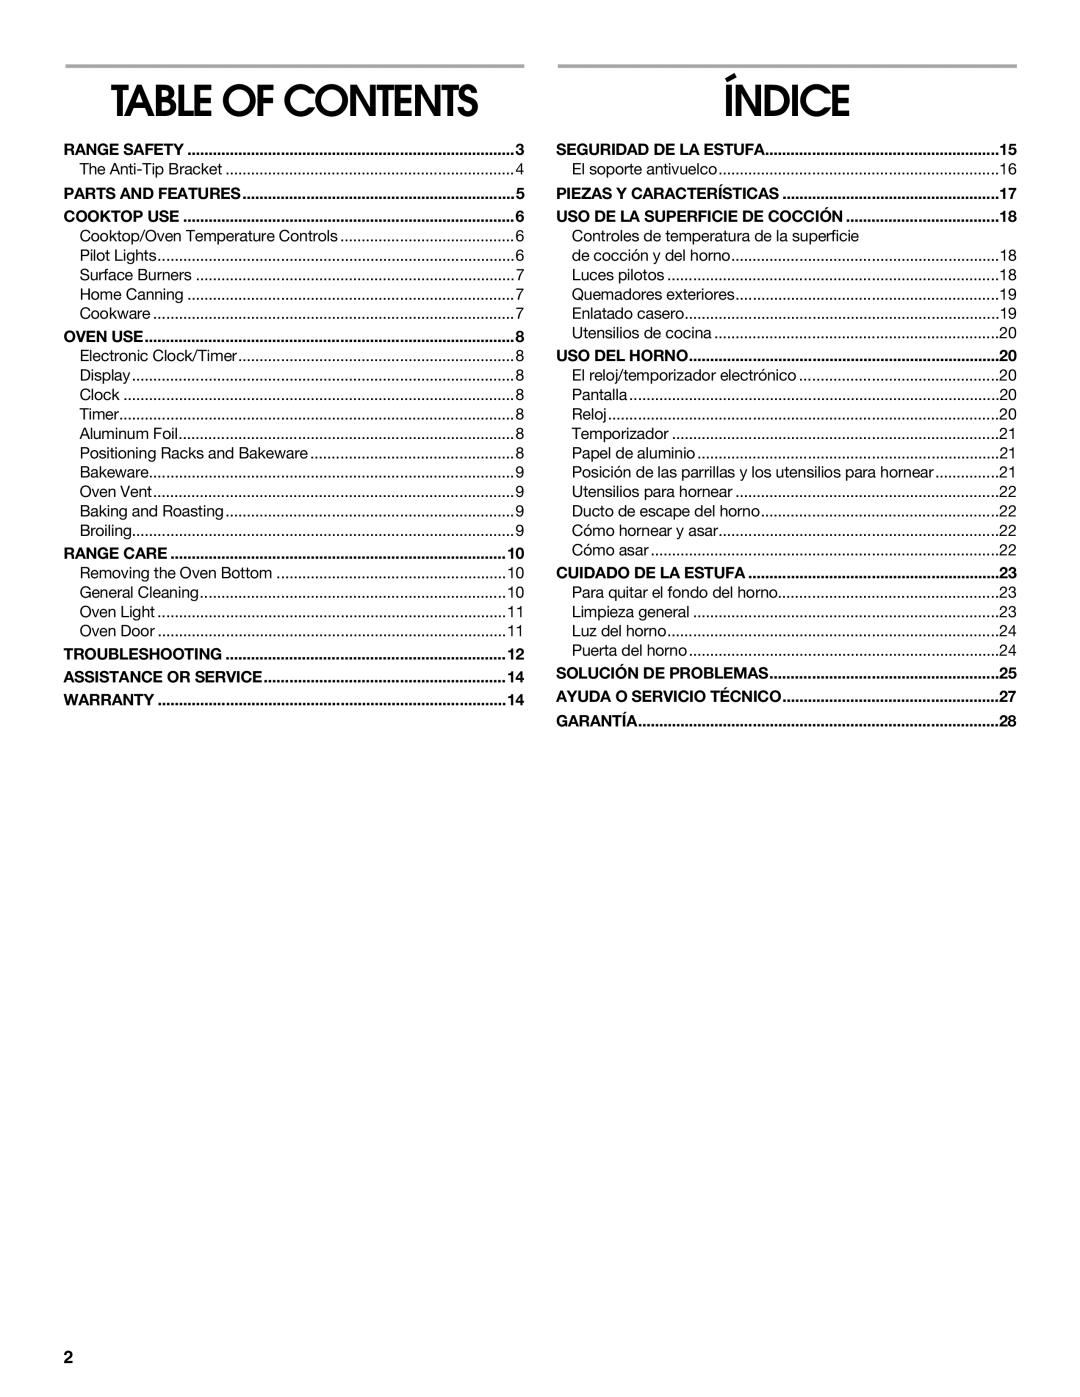 Whirlpool STANDARD CLEANING GAS RANGE manual Índice, Table Of Contents 